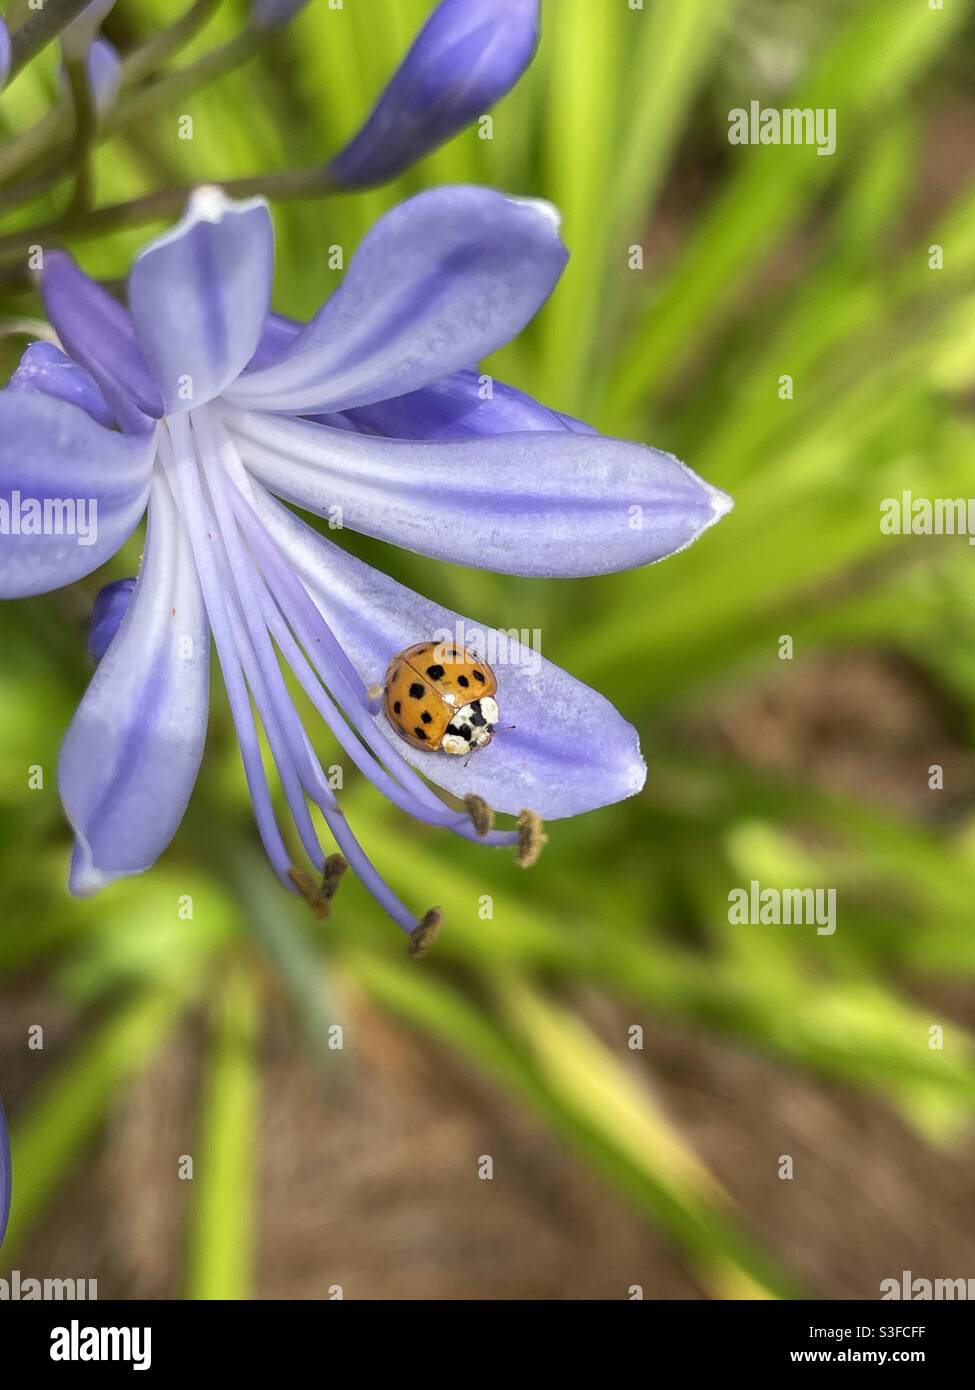 Chinese lady beetle on purple lily of the Nile flower Stock Photo